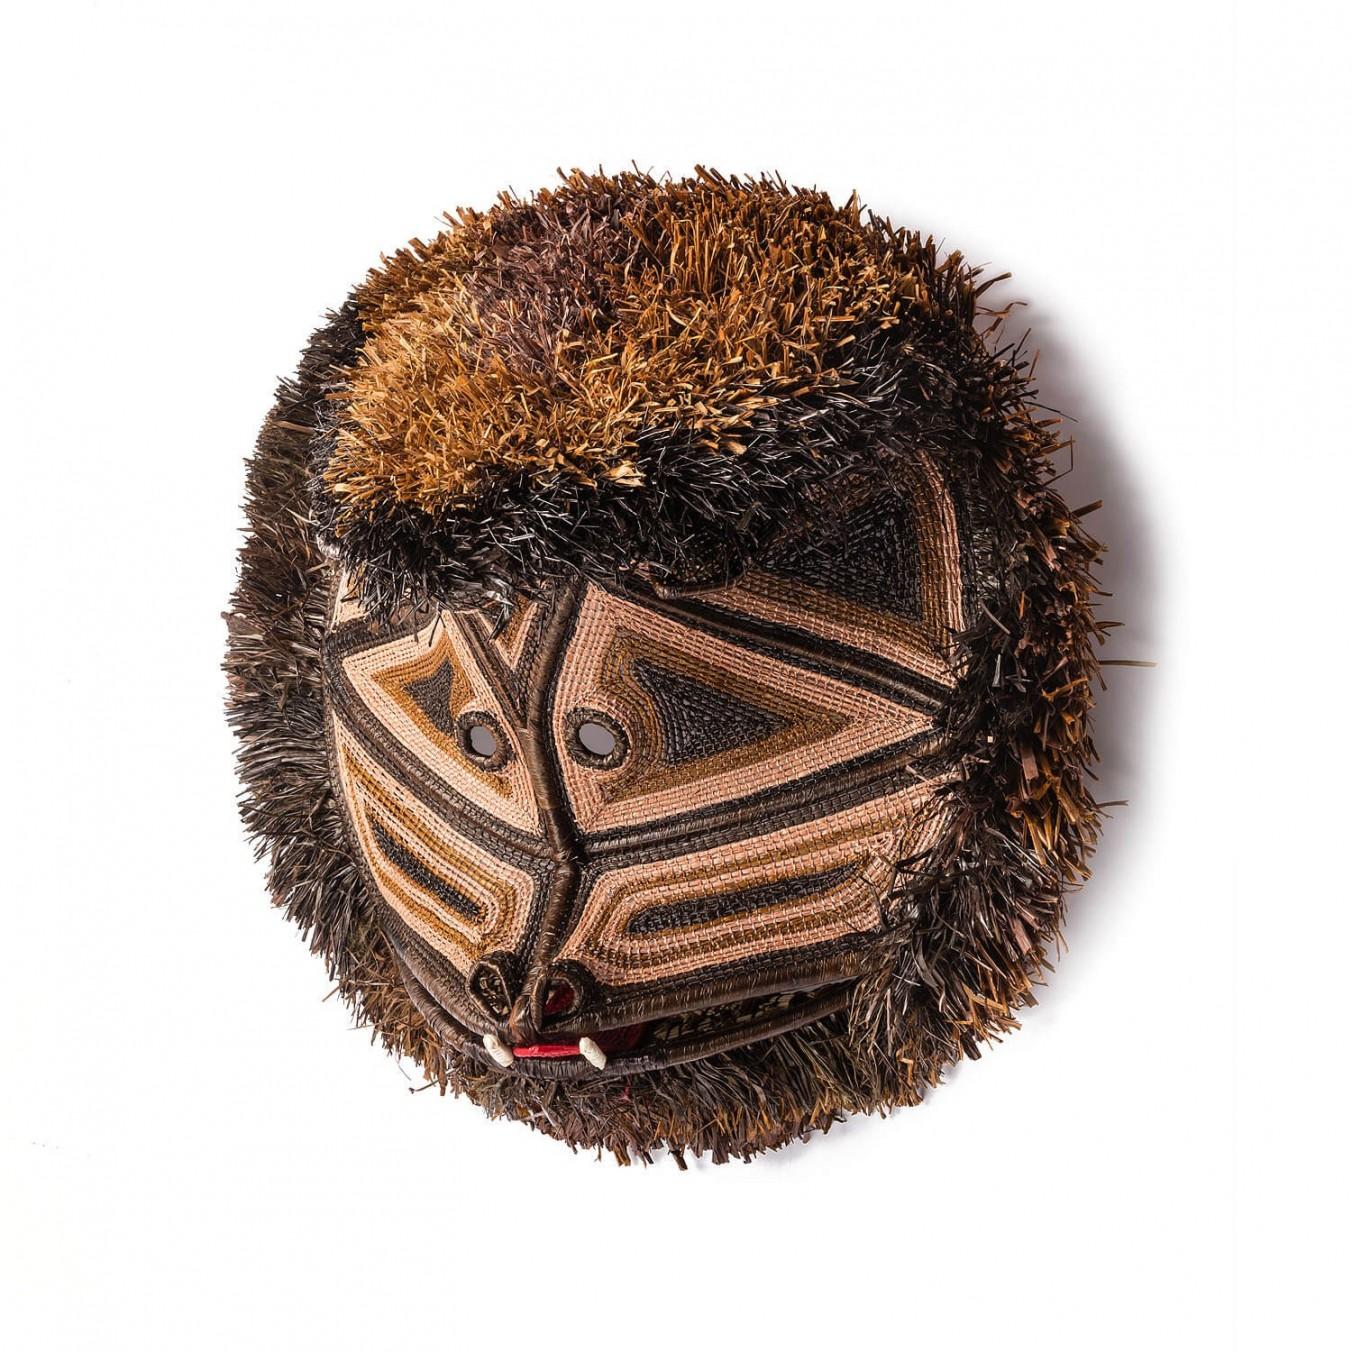 Decorative hand-woven mask from Panama, Nemboro Mono by Ethic&Tropic

Extraordinary art and decorative items, these masks come from the shamanic beliefs and rituals of indigenous Embera tribes of Panama. Through the shamans, Embera people get in